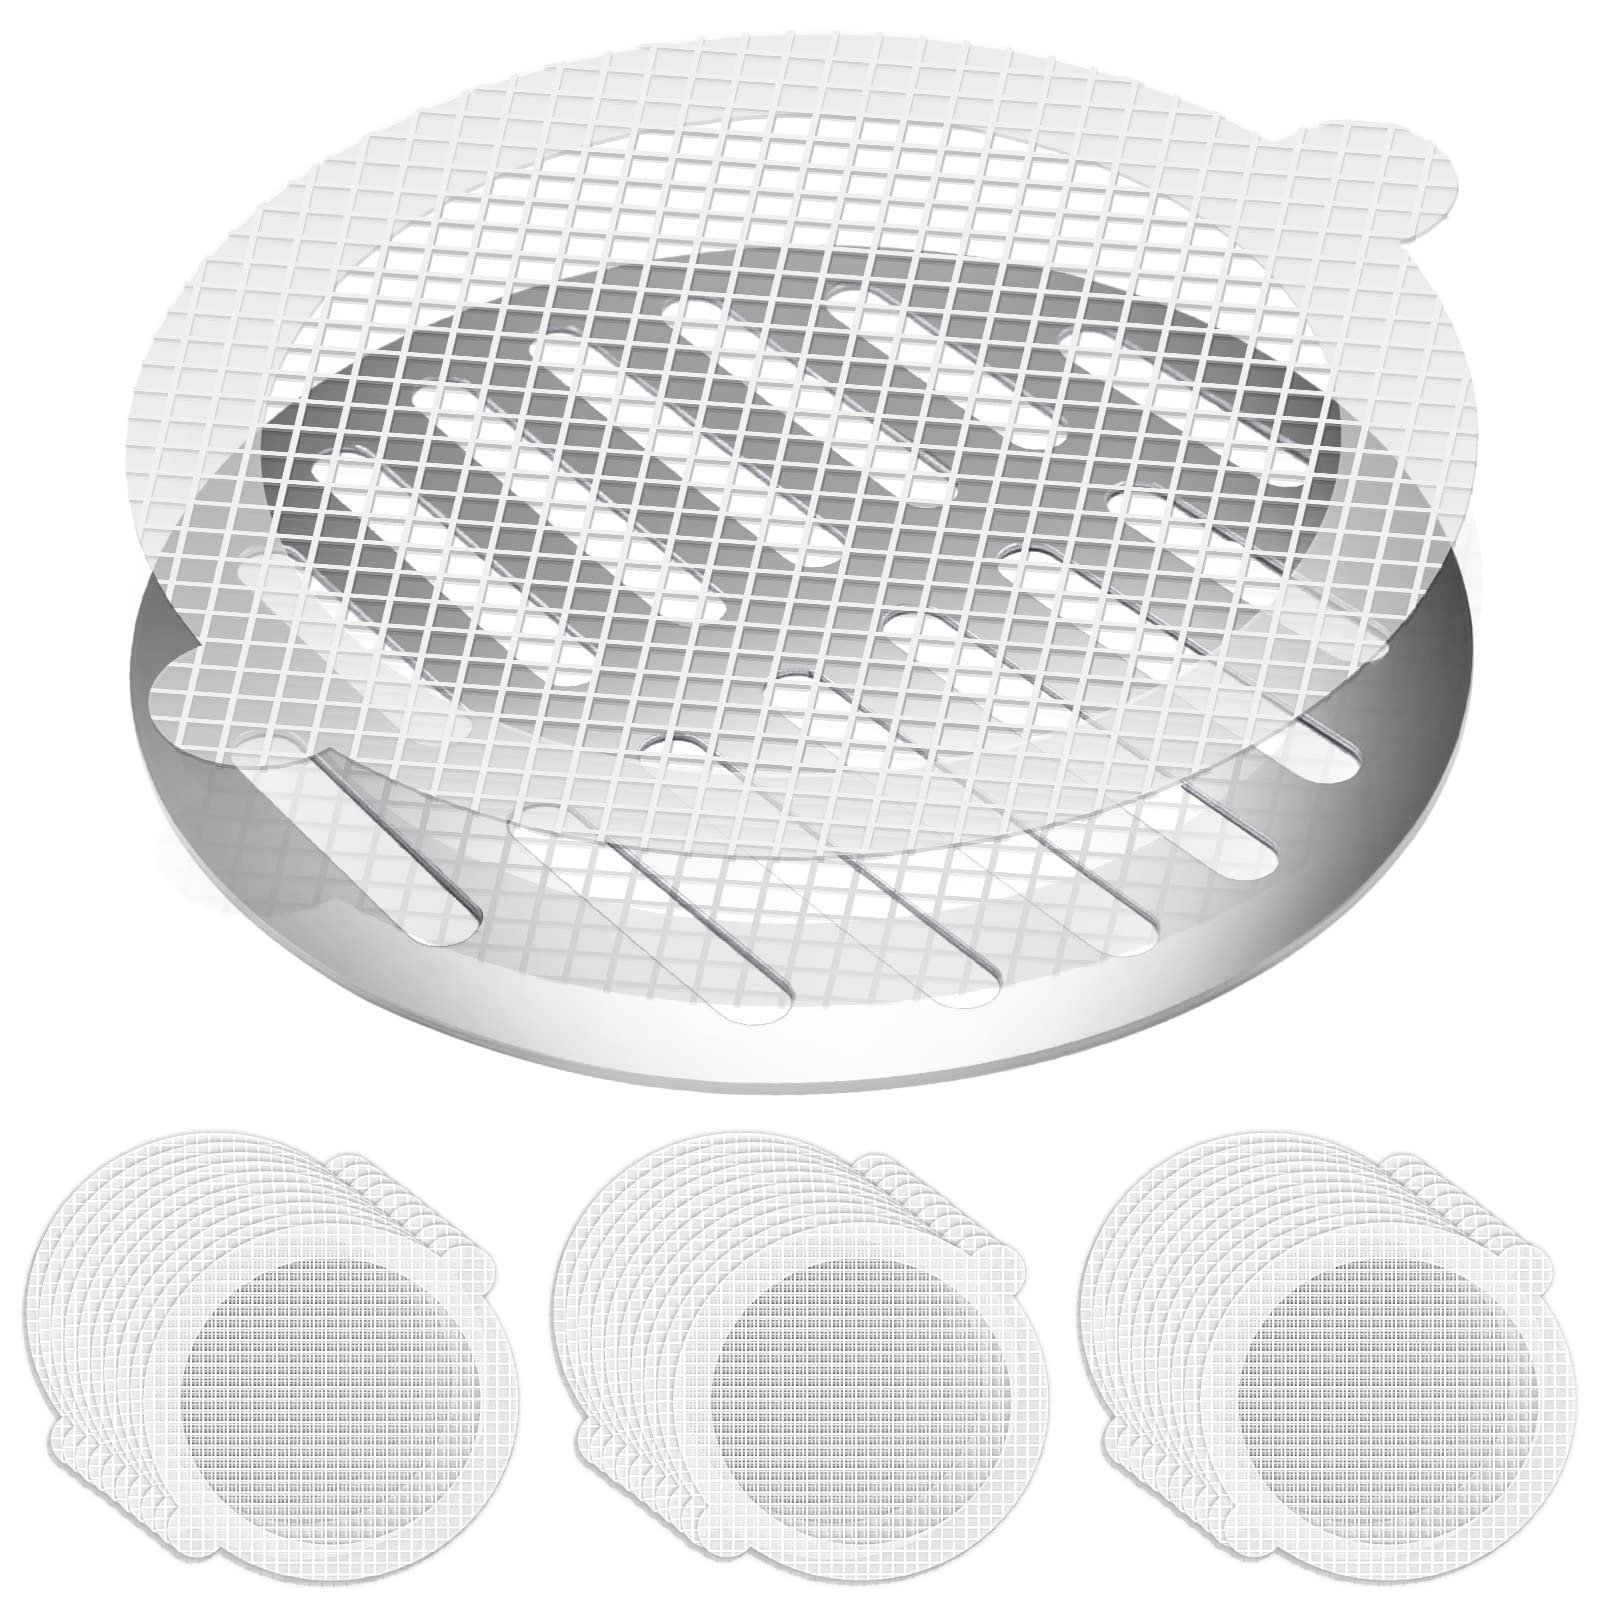 🔥Hot Sale-49% OFF🔥Disposable Shower Drain Hair Catcher-Buy 2 Get 2 Free